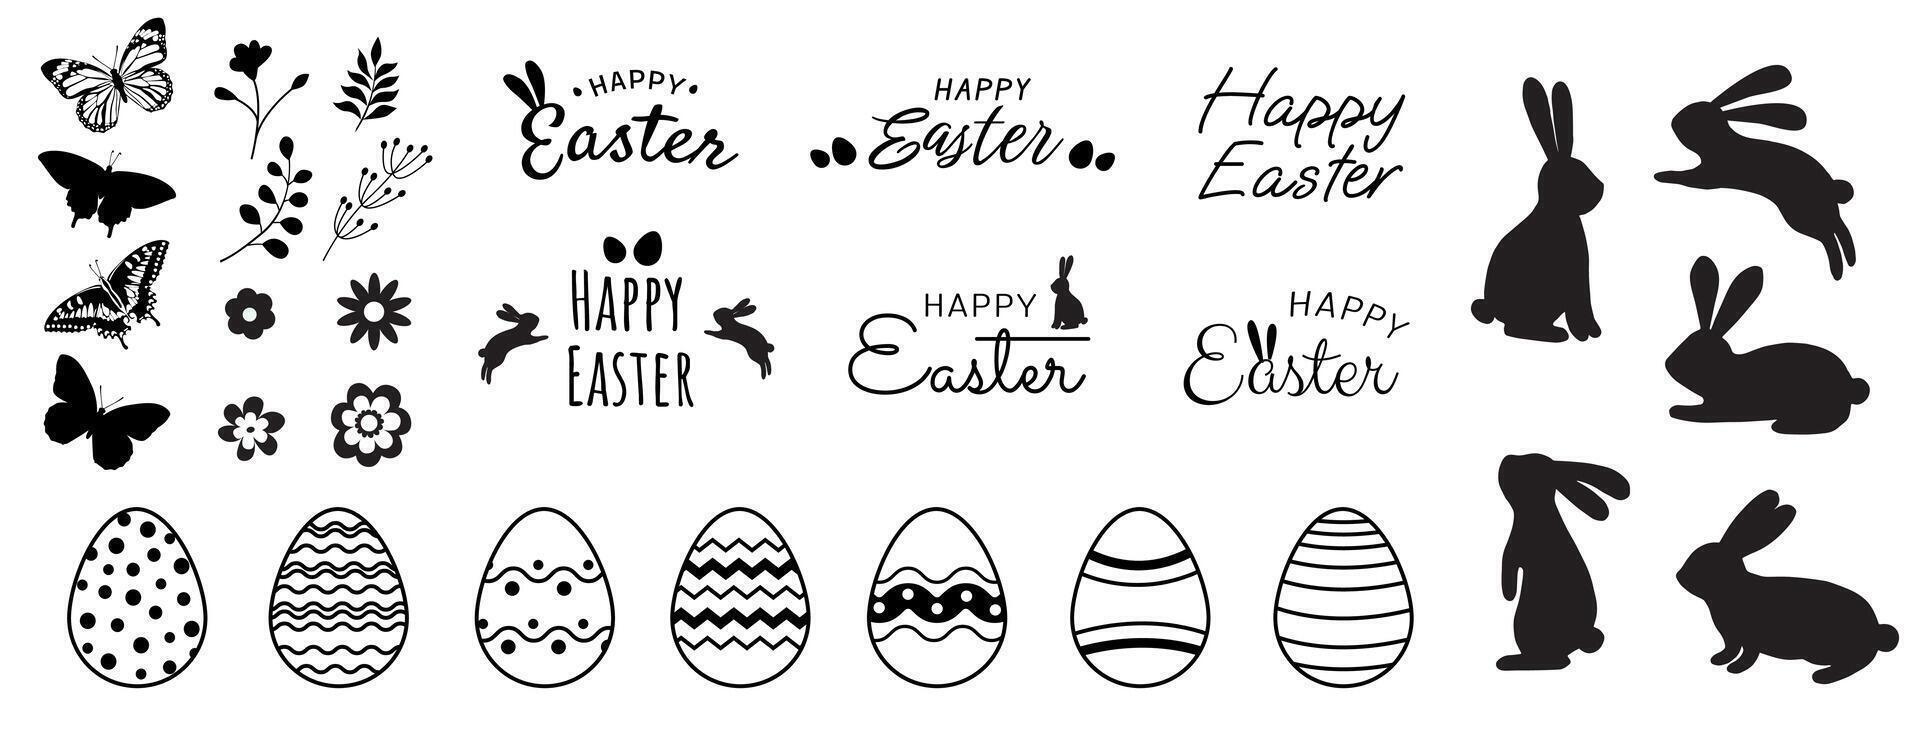 Large vector Easter collection of elements for various designs. The collection contains bunny silhouettes, simple flowers, Easter lettering and eggs with graphic patterns.